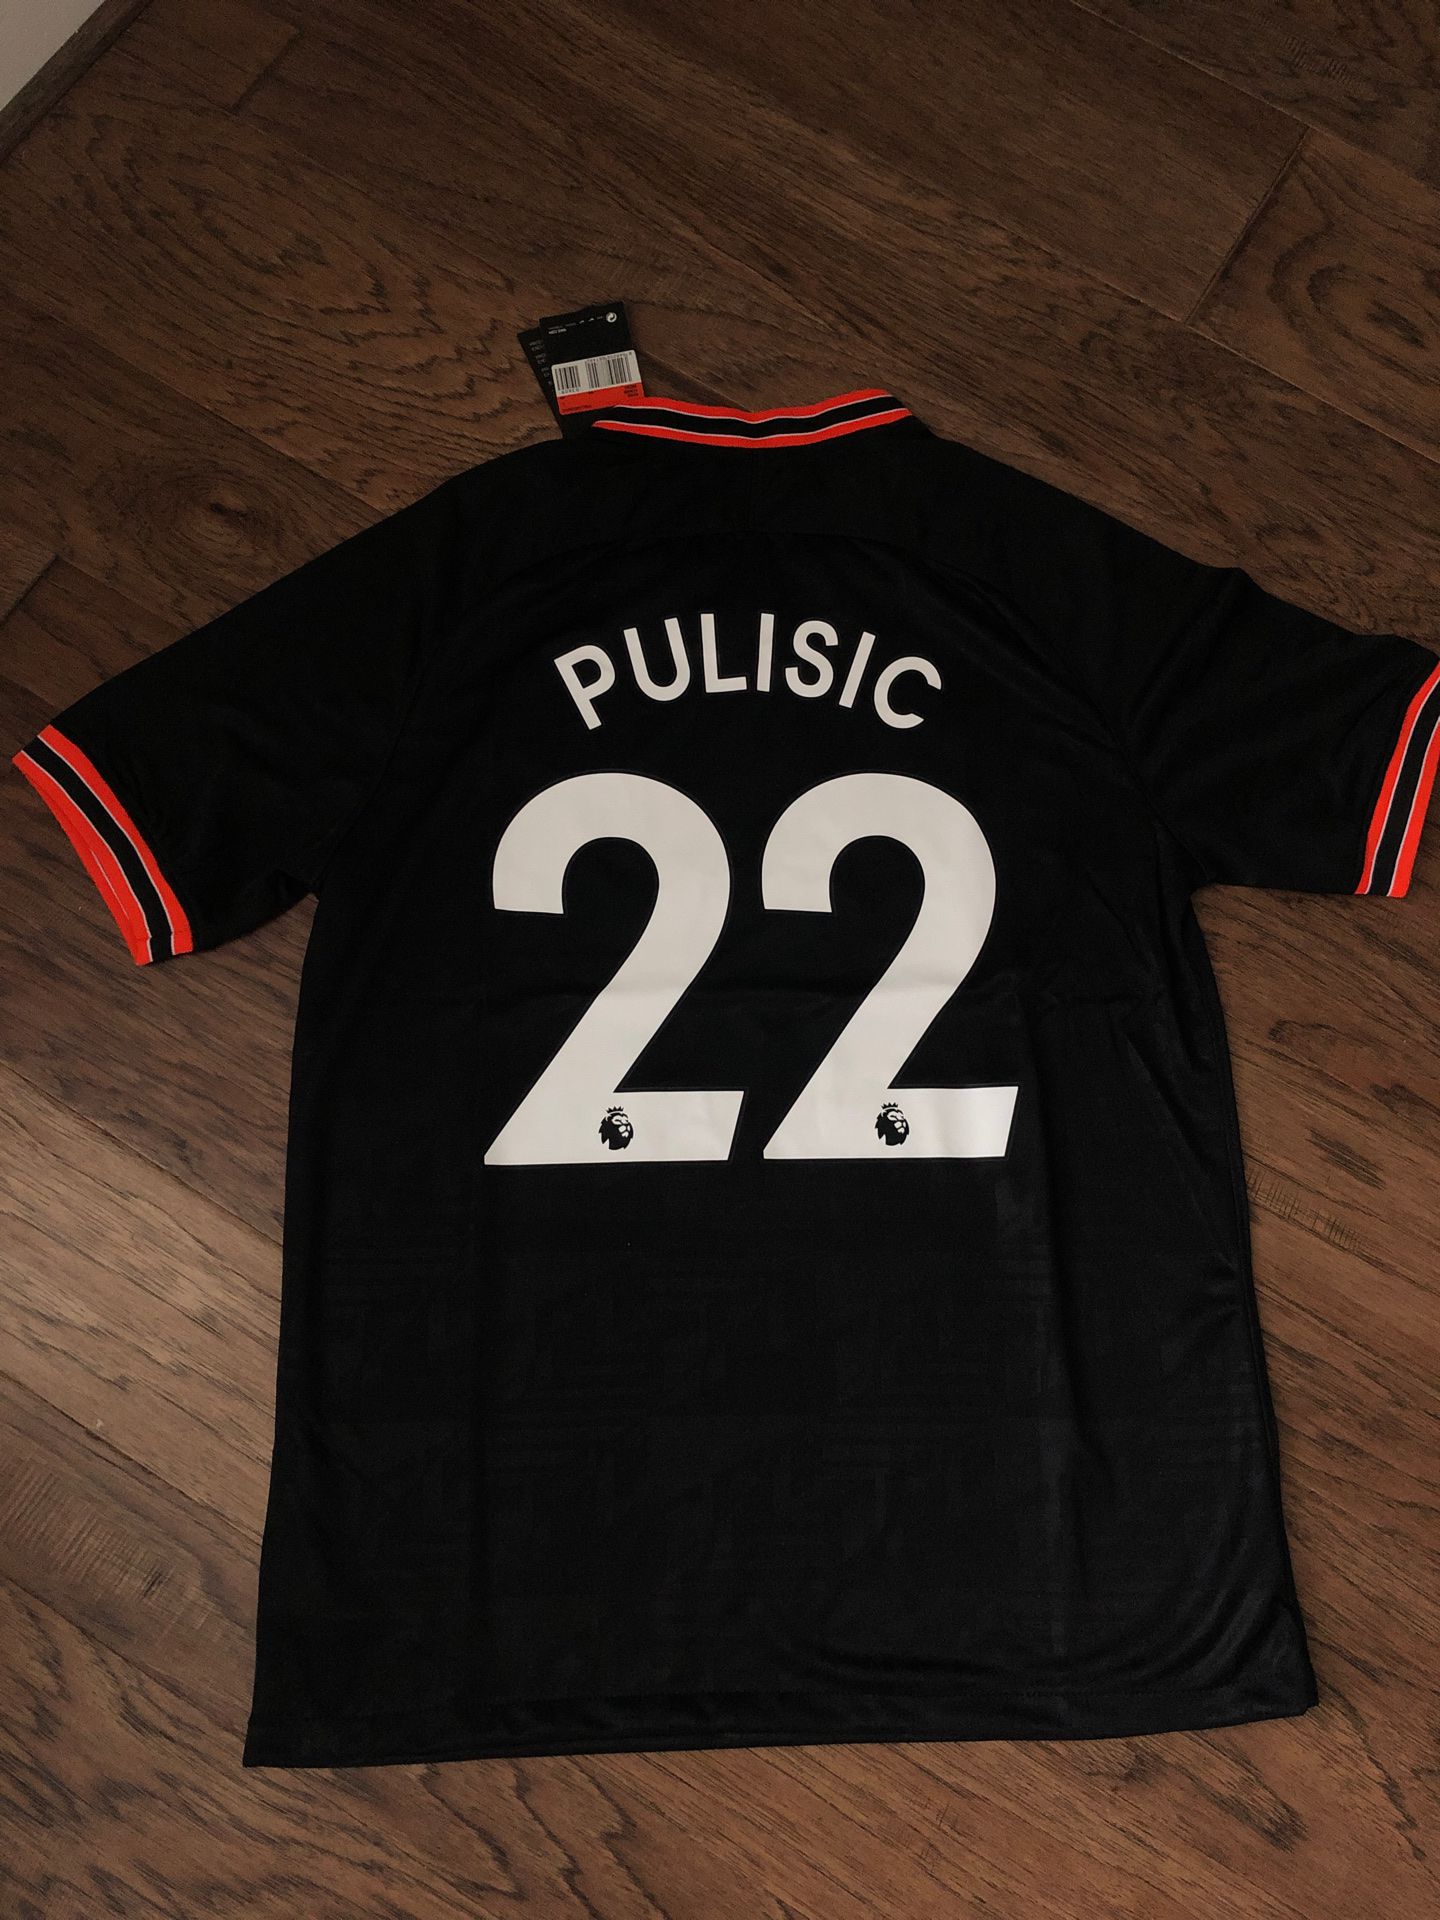 Size large Chelsea third kit Pulisic 22 soccer jersey